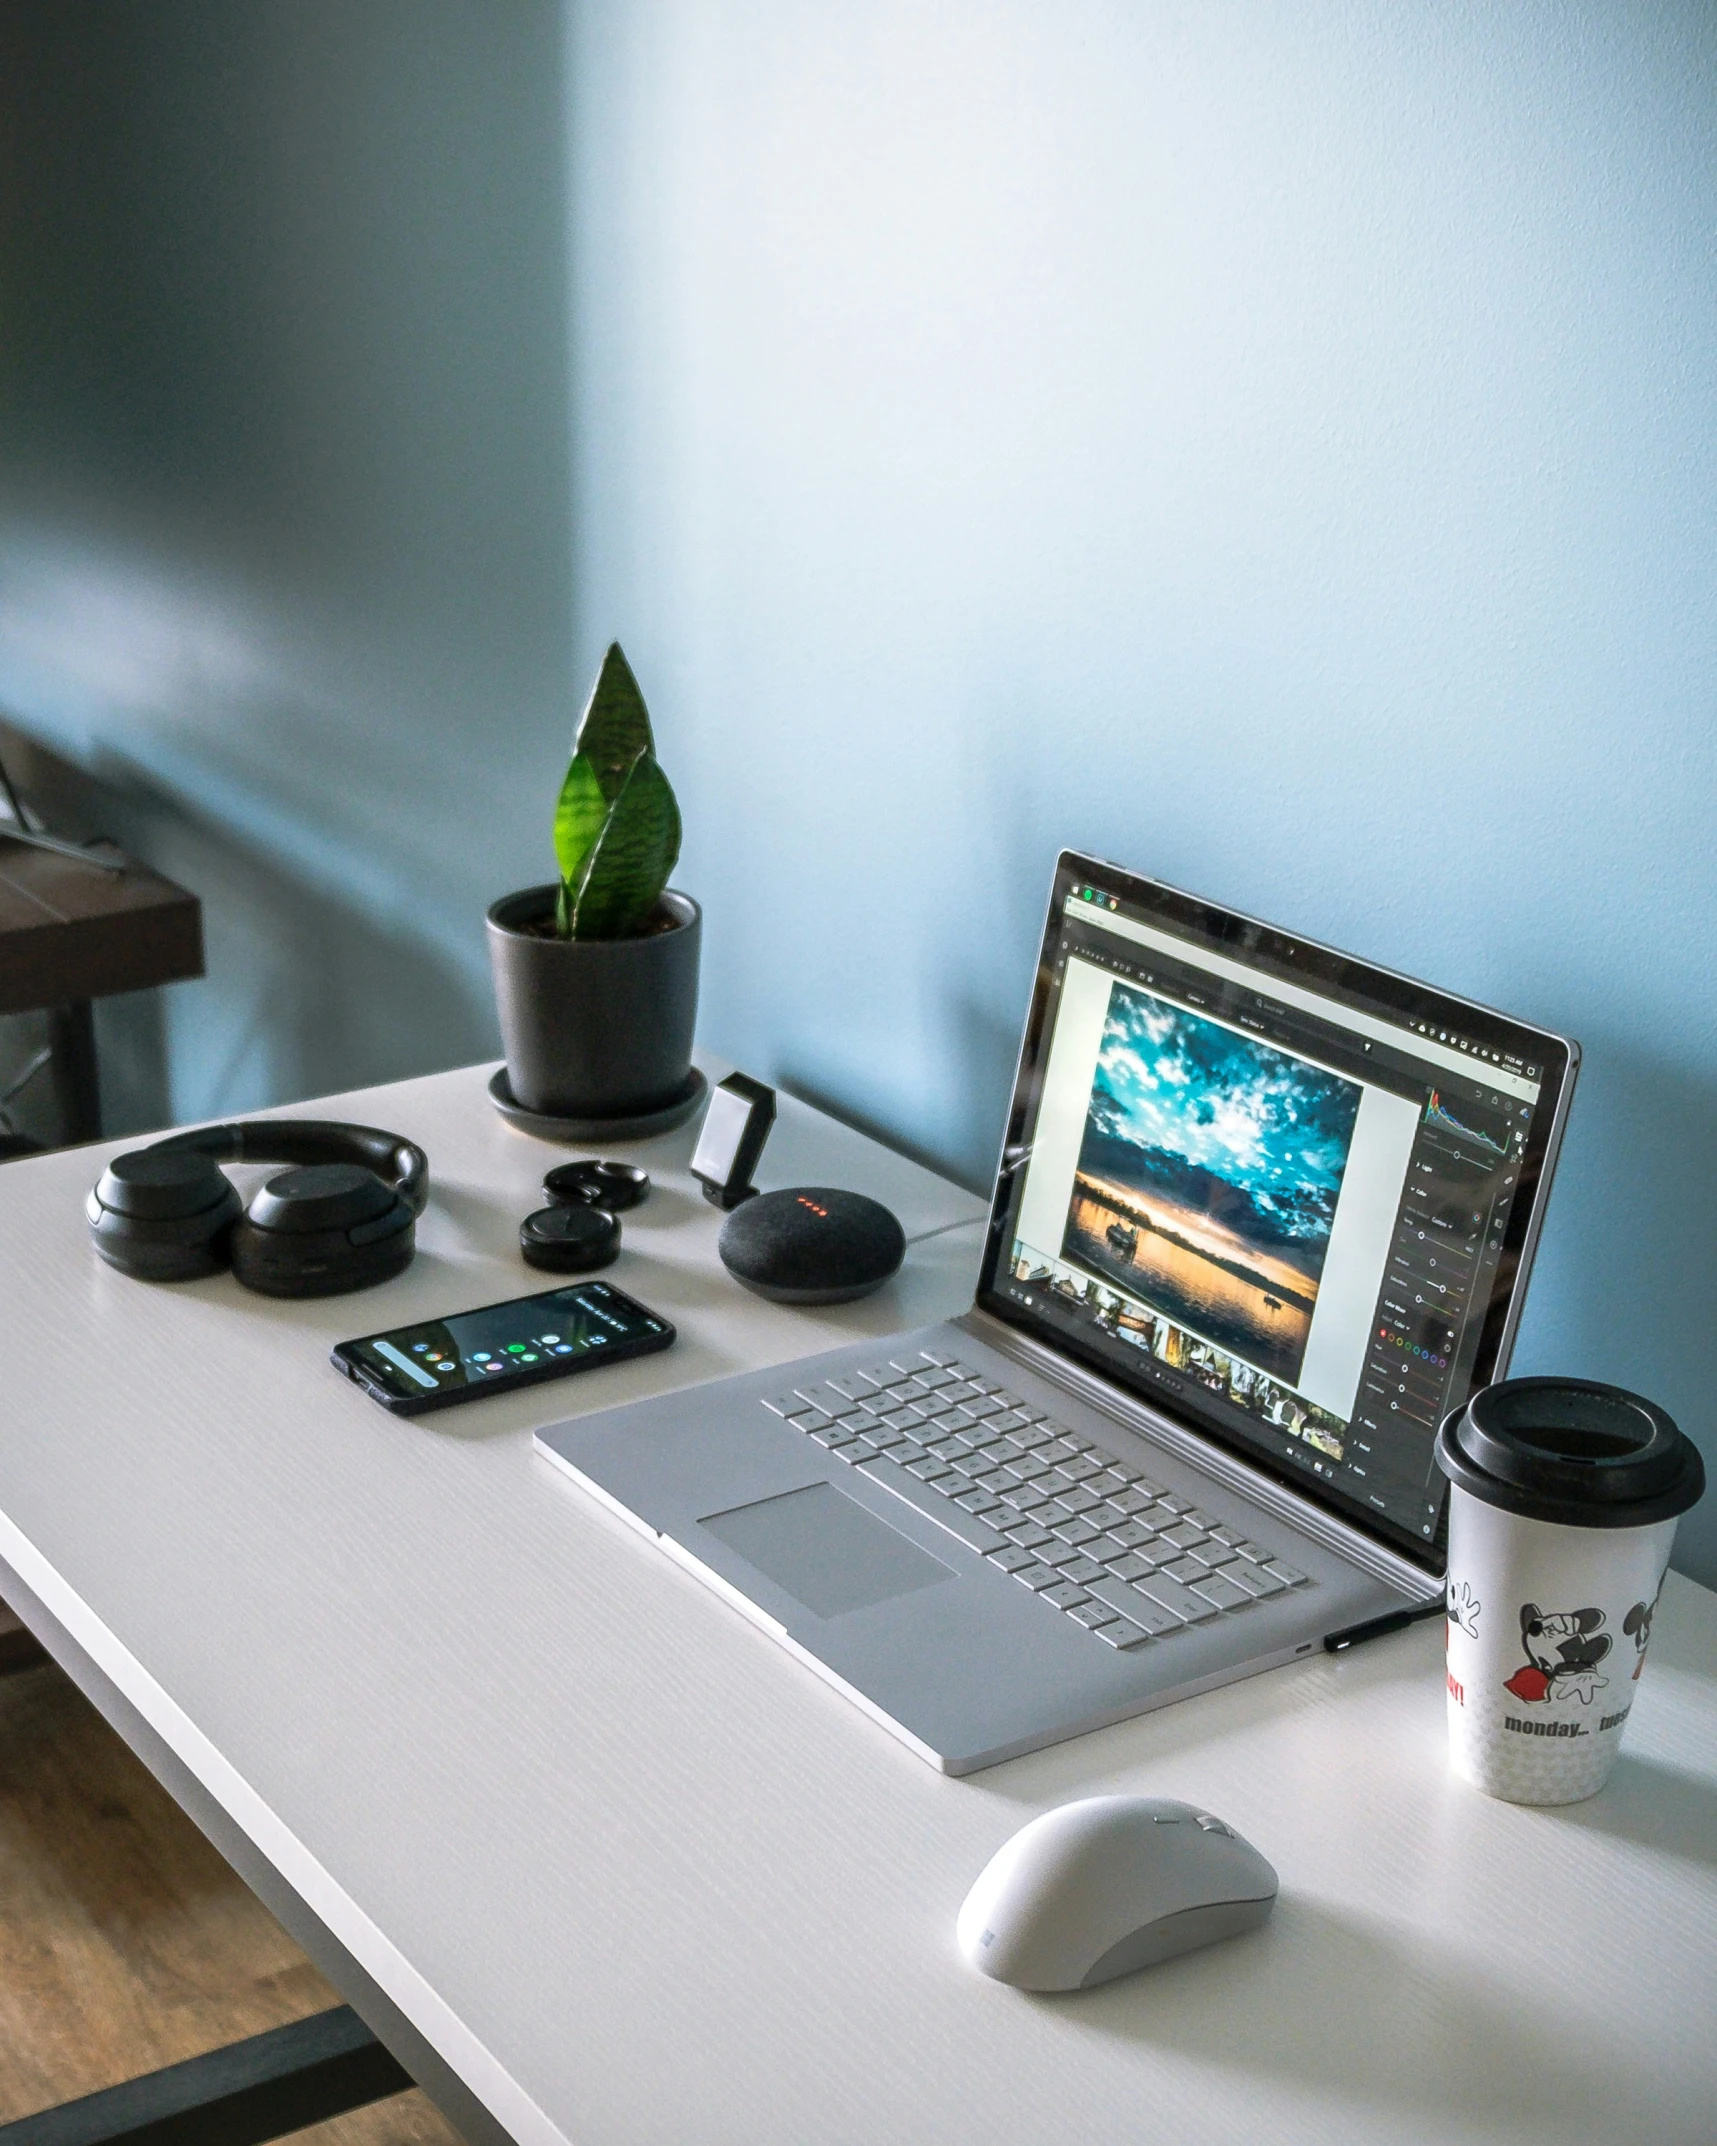 a laptop on the desk is opened with a cup of coffee, headphones and a cell phone